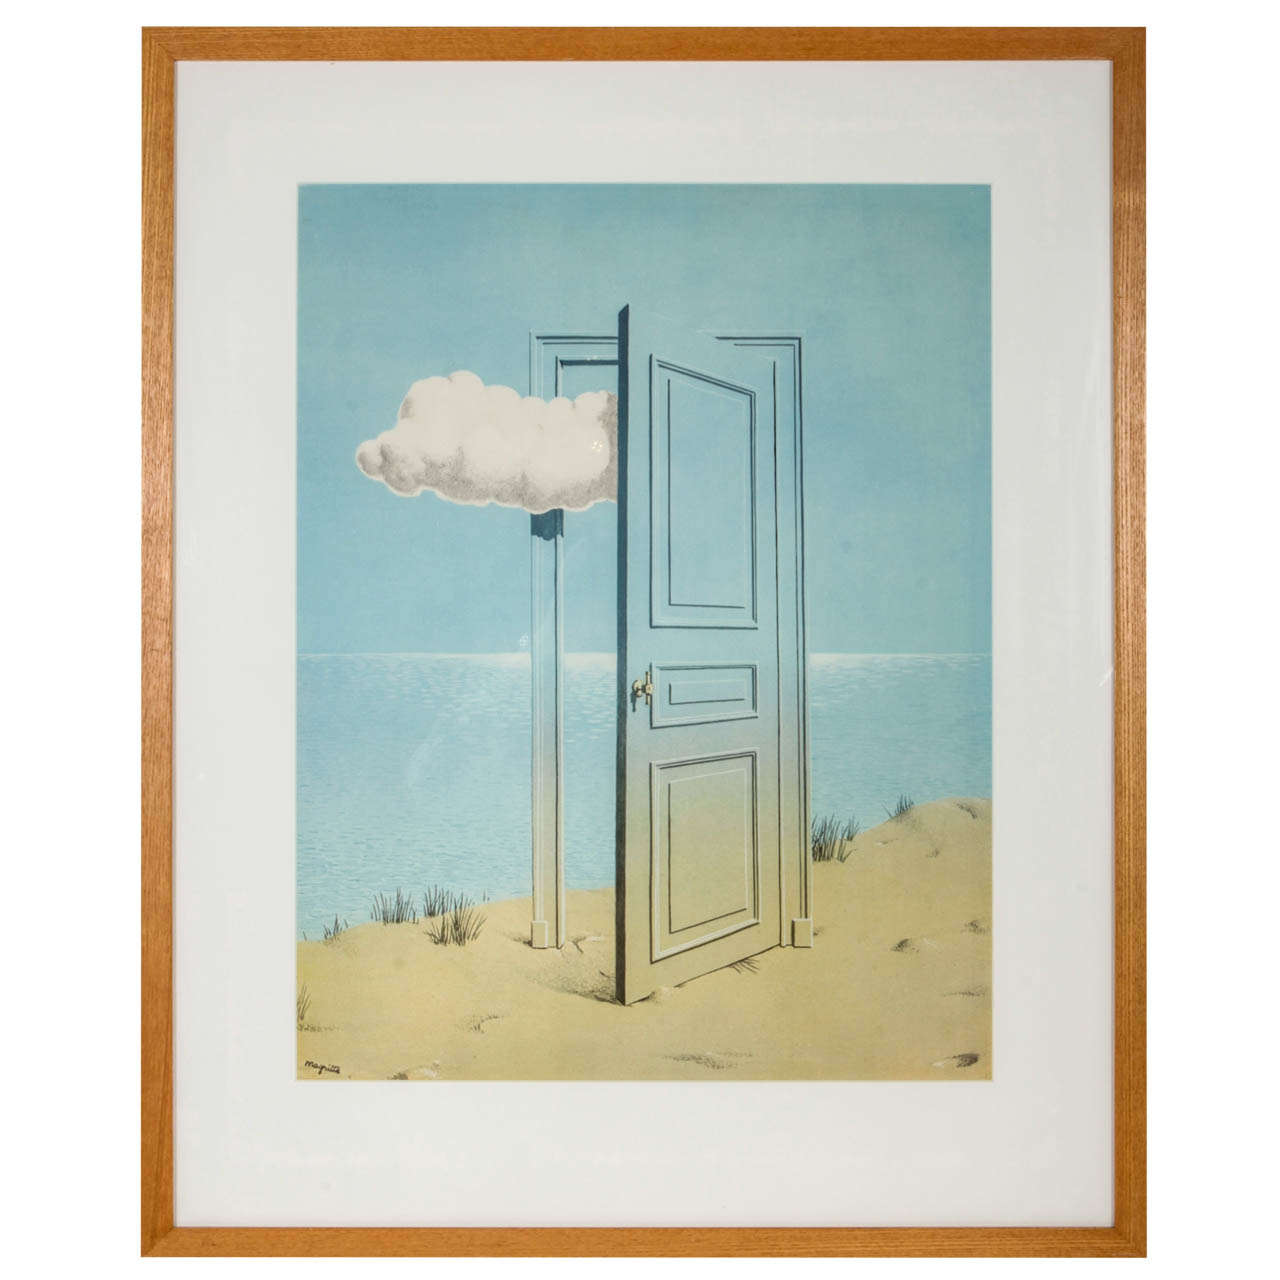 Framed 1970's Rene Magritte print "The Victory" For Sale